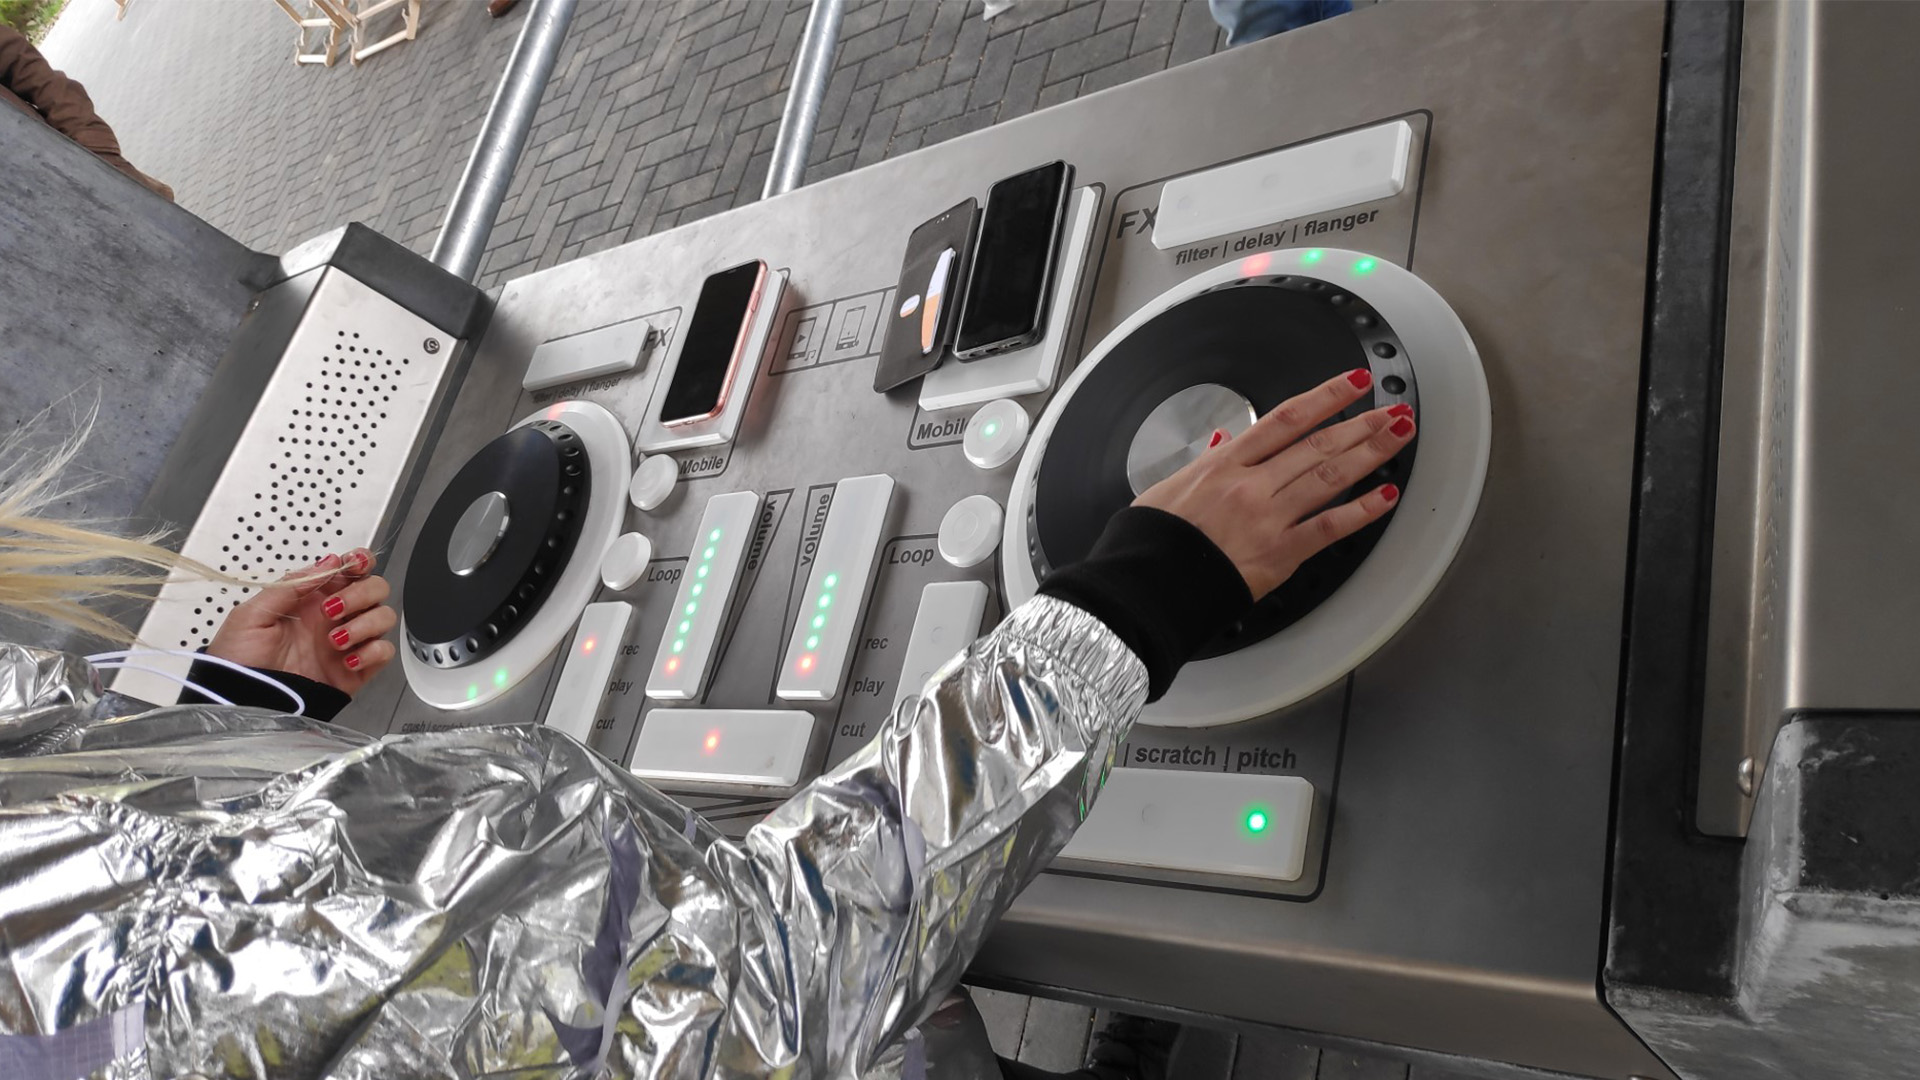 A person in a shiny silver jacket with red nail polish is using a DJ controller on an outdoor setup. One hand is placed on a turntable and the other on a set of buttons. Nearby, there are phones and equipment. The ground is paved with bricks.